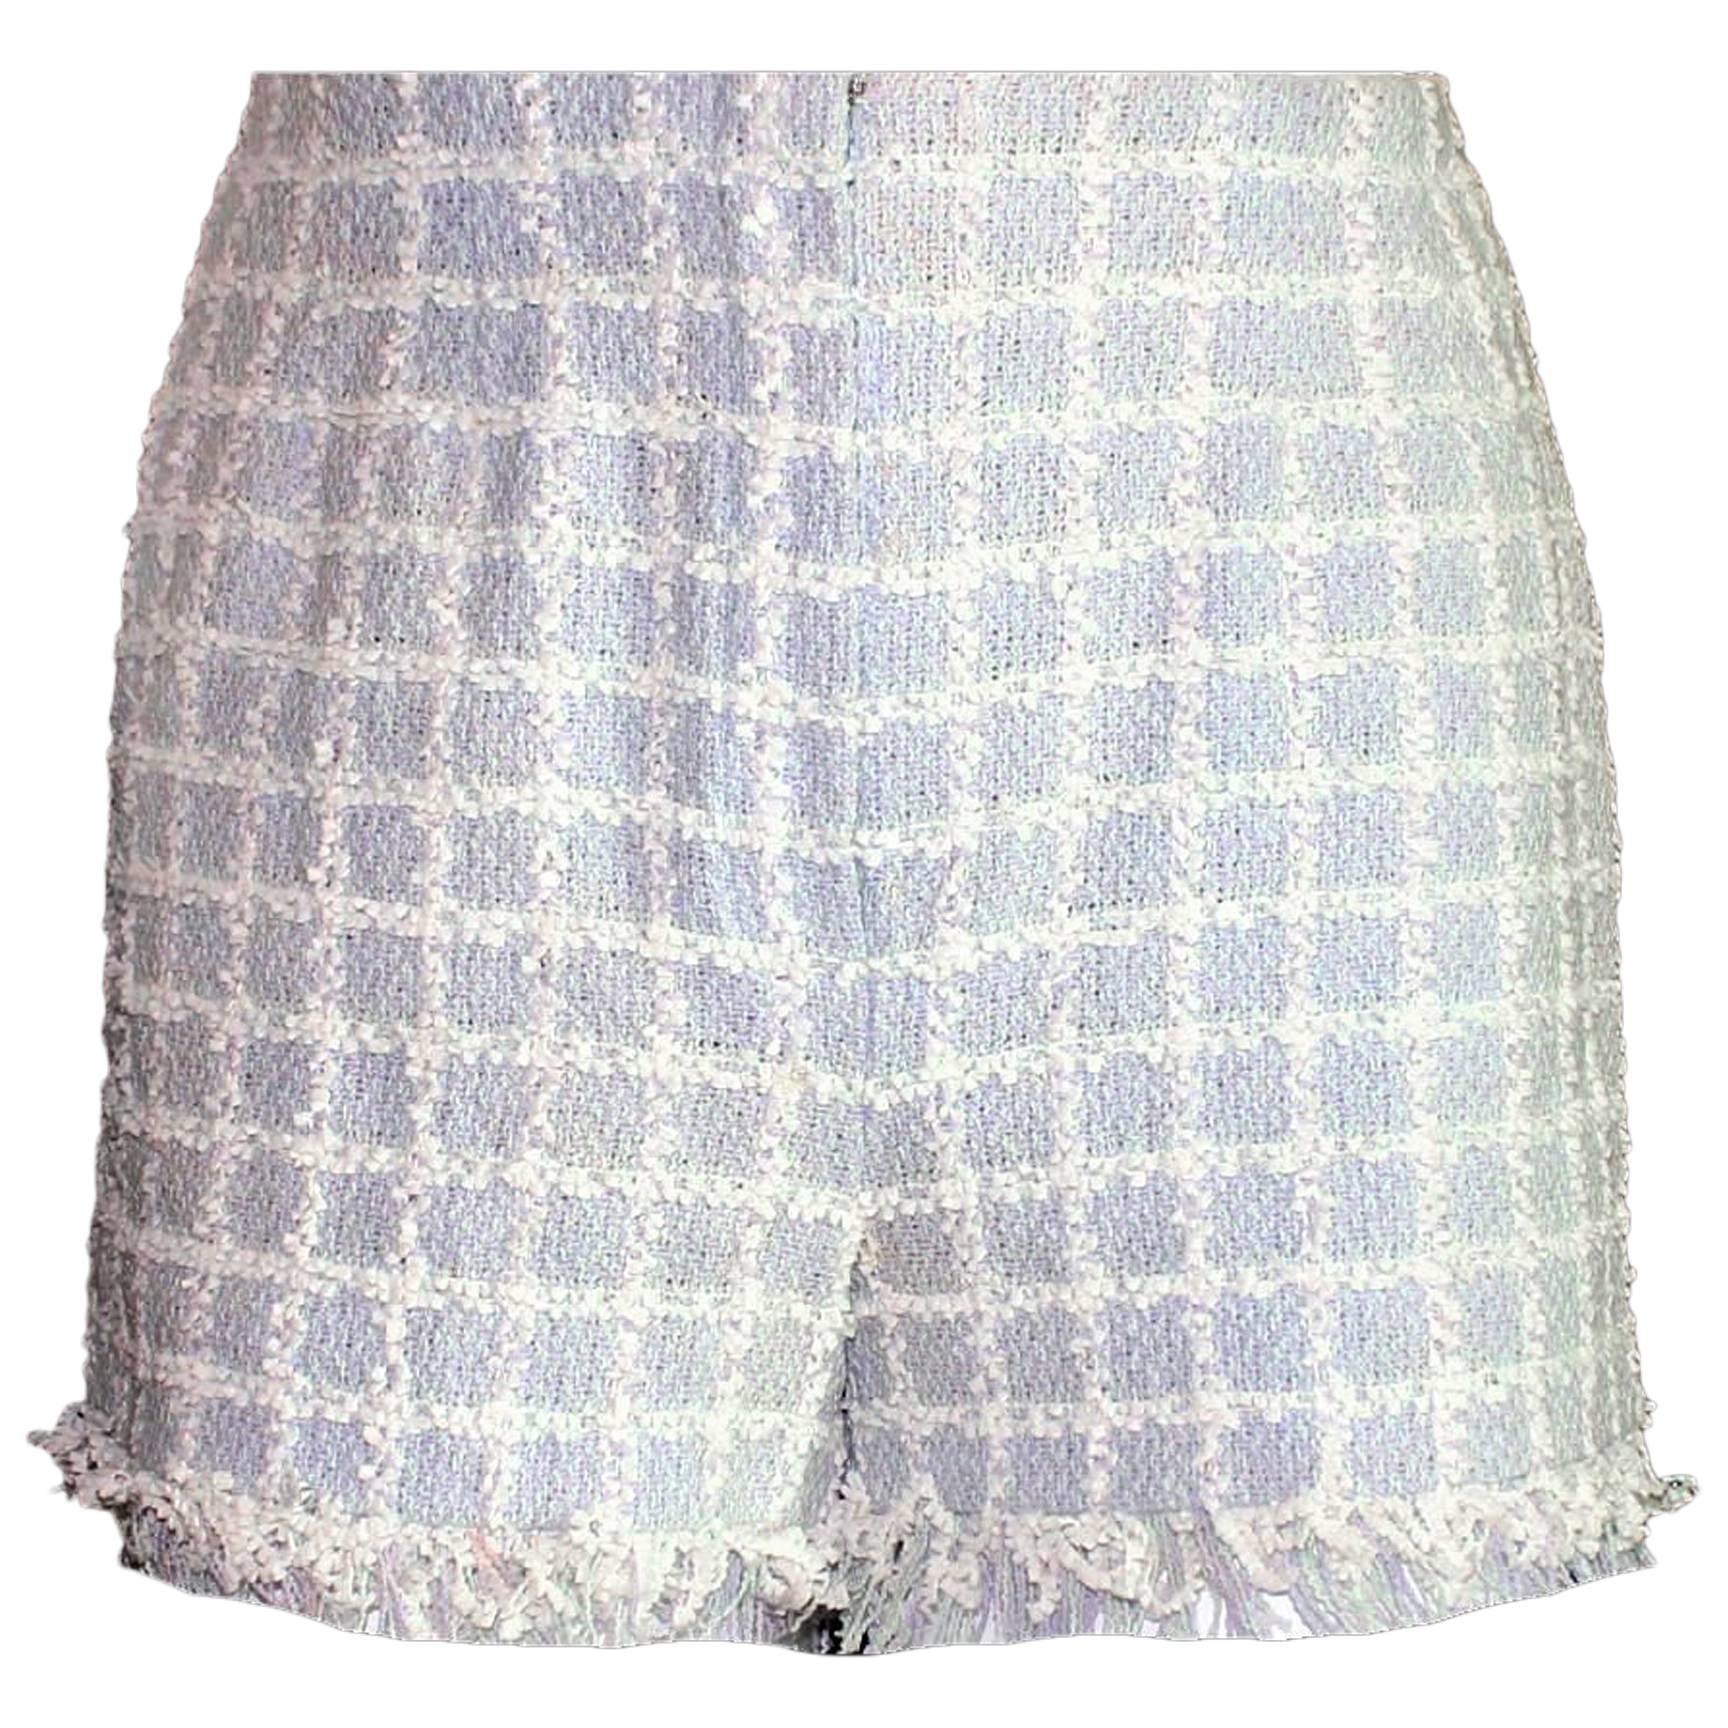 Collector's Amazing Chanel Fringed Tweed Shorts Hot Pants